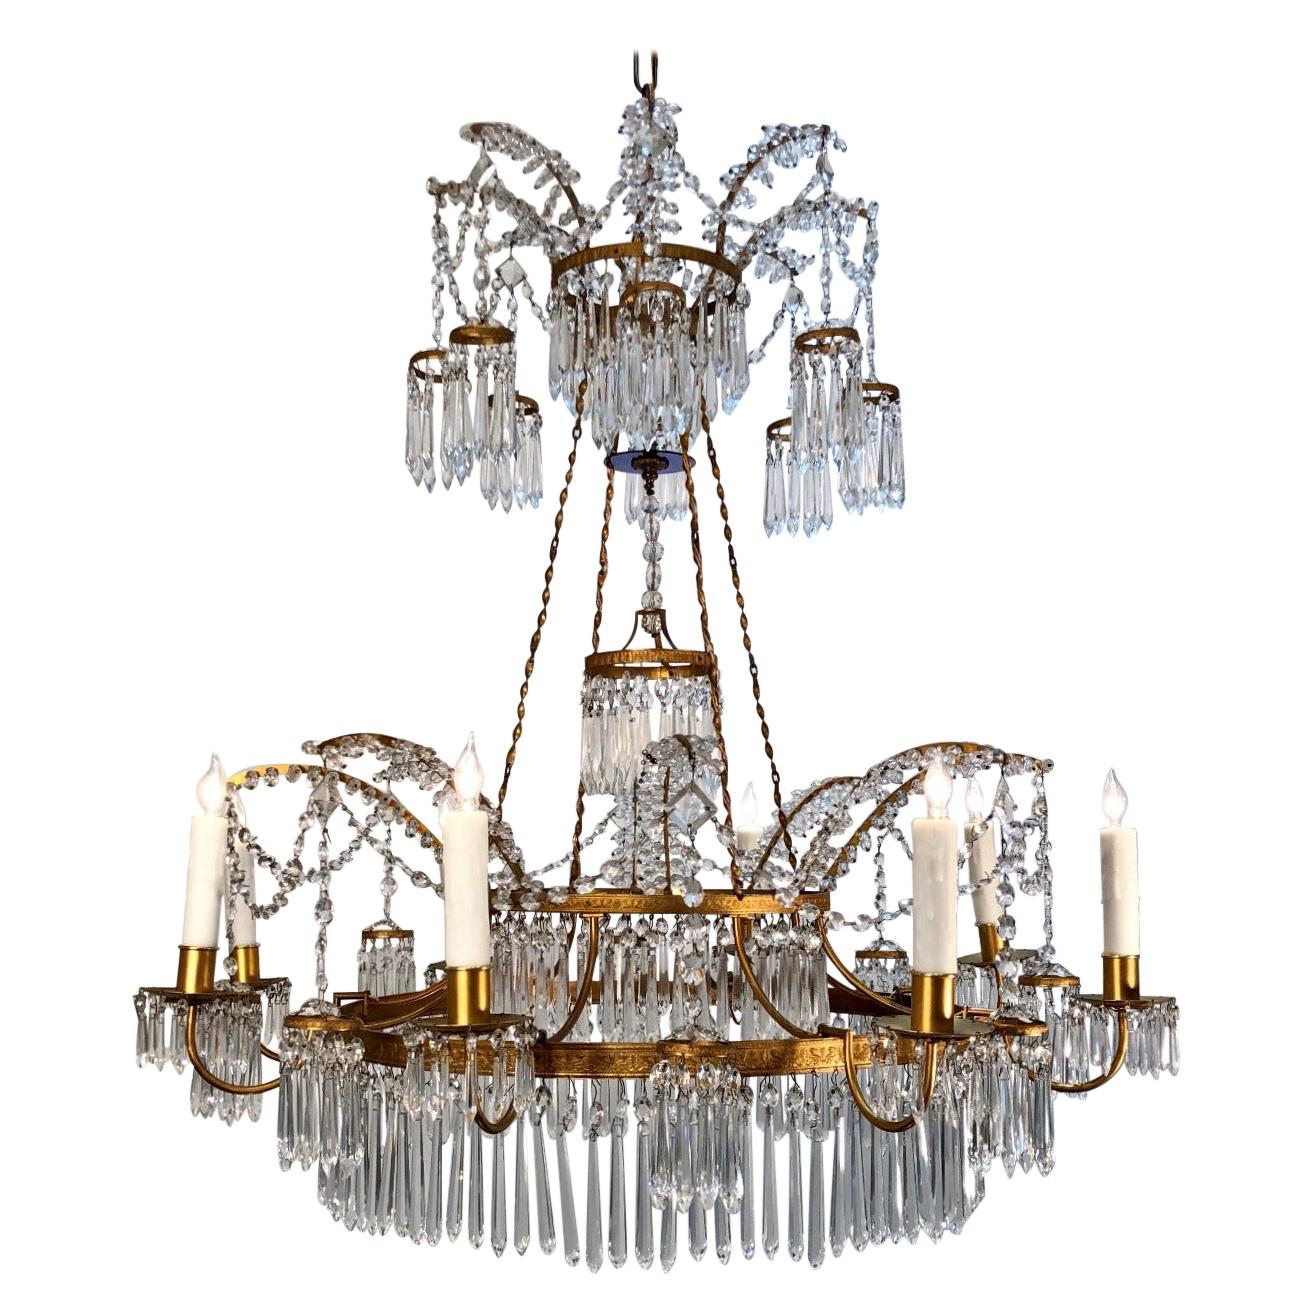 19th Century Russian Imperial Style Chandelier